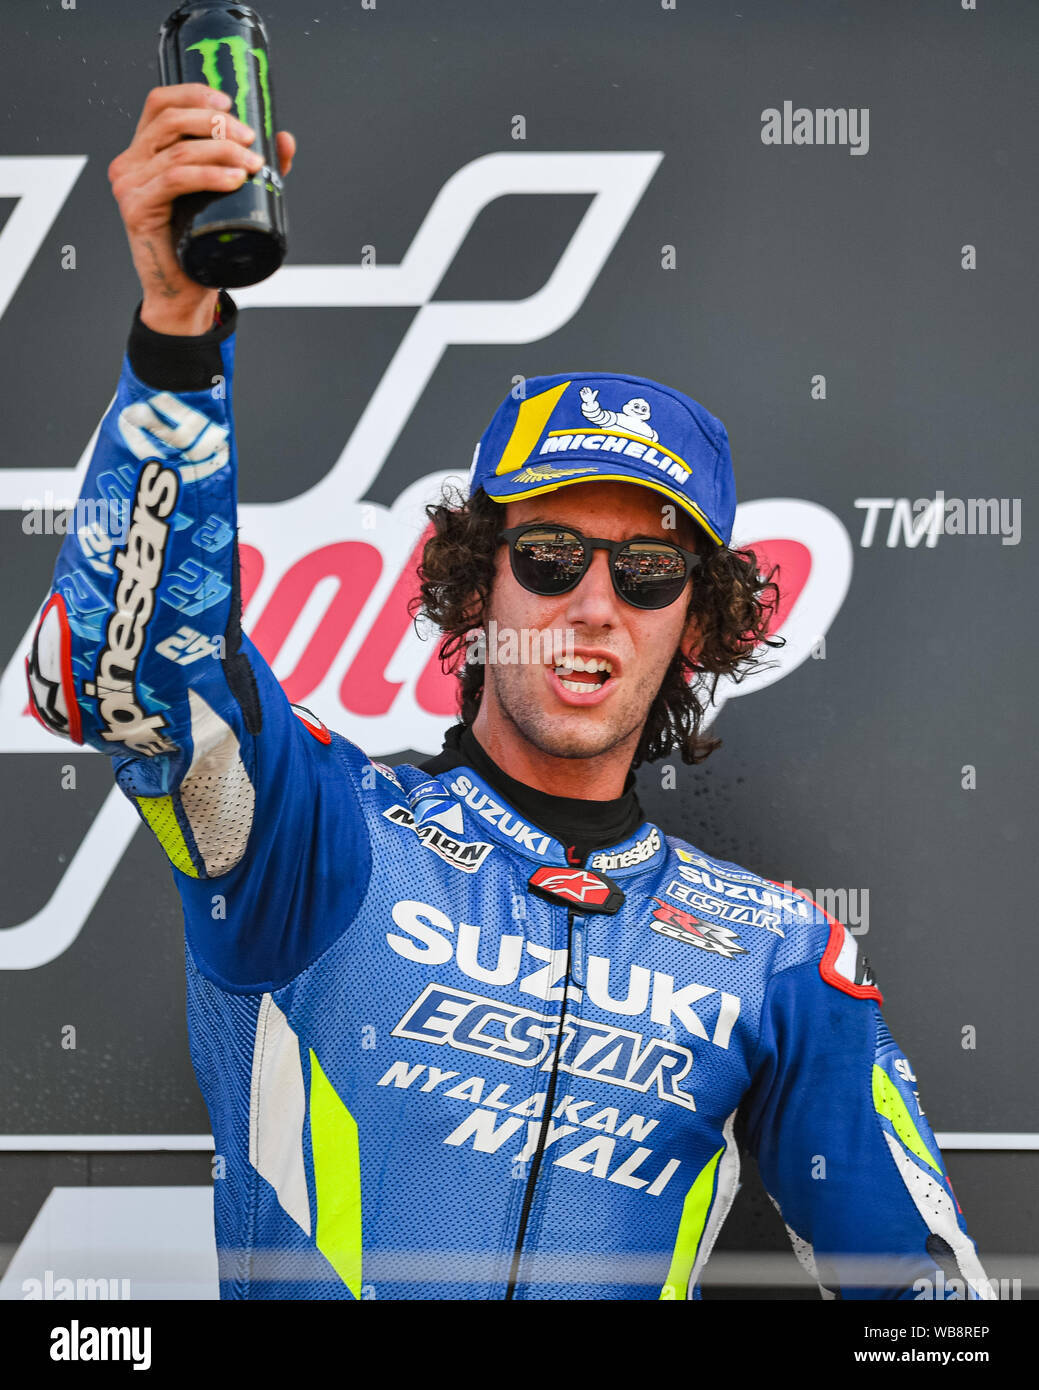 Towcester, UK. 25th Aug, 2019. Alex Rins (SPA) of Team SUZUKI ECSTAR celebrates winning the Sunday Race at presentation after the Sunday’s Race of  GoPro British Grand Prix at Silverstone Circuit on Sunday, August 25, 2019 in TOWCESTER, ENGLAND. Credit: Taka G Wu/Alamy Live News Stock Photo